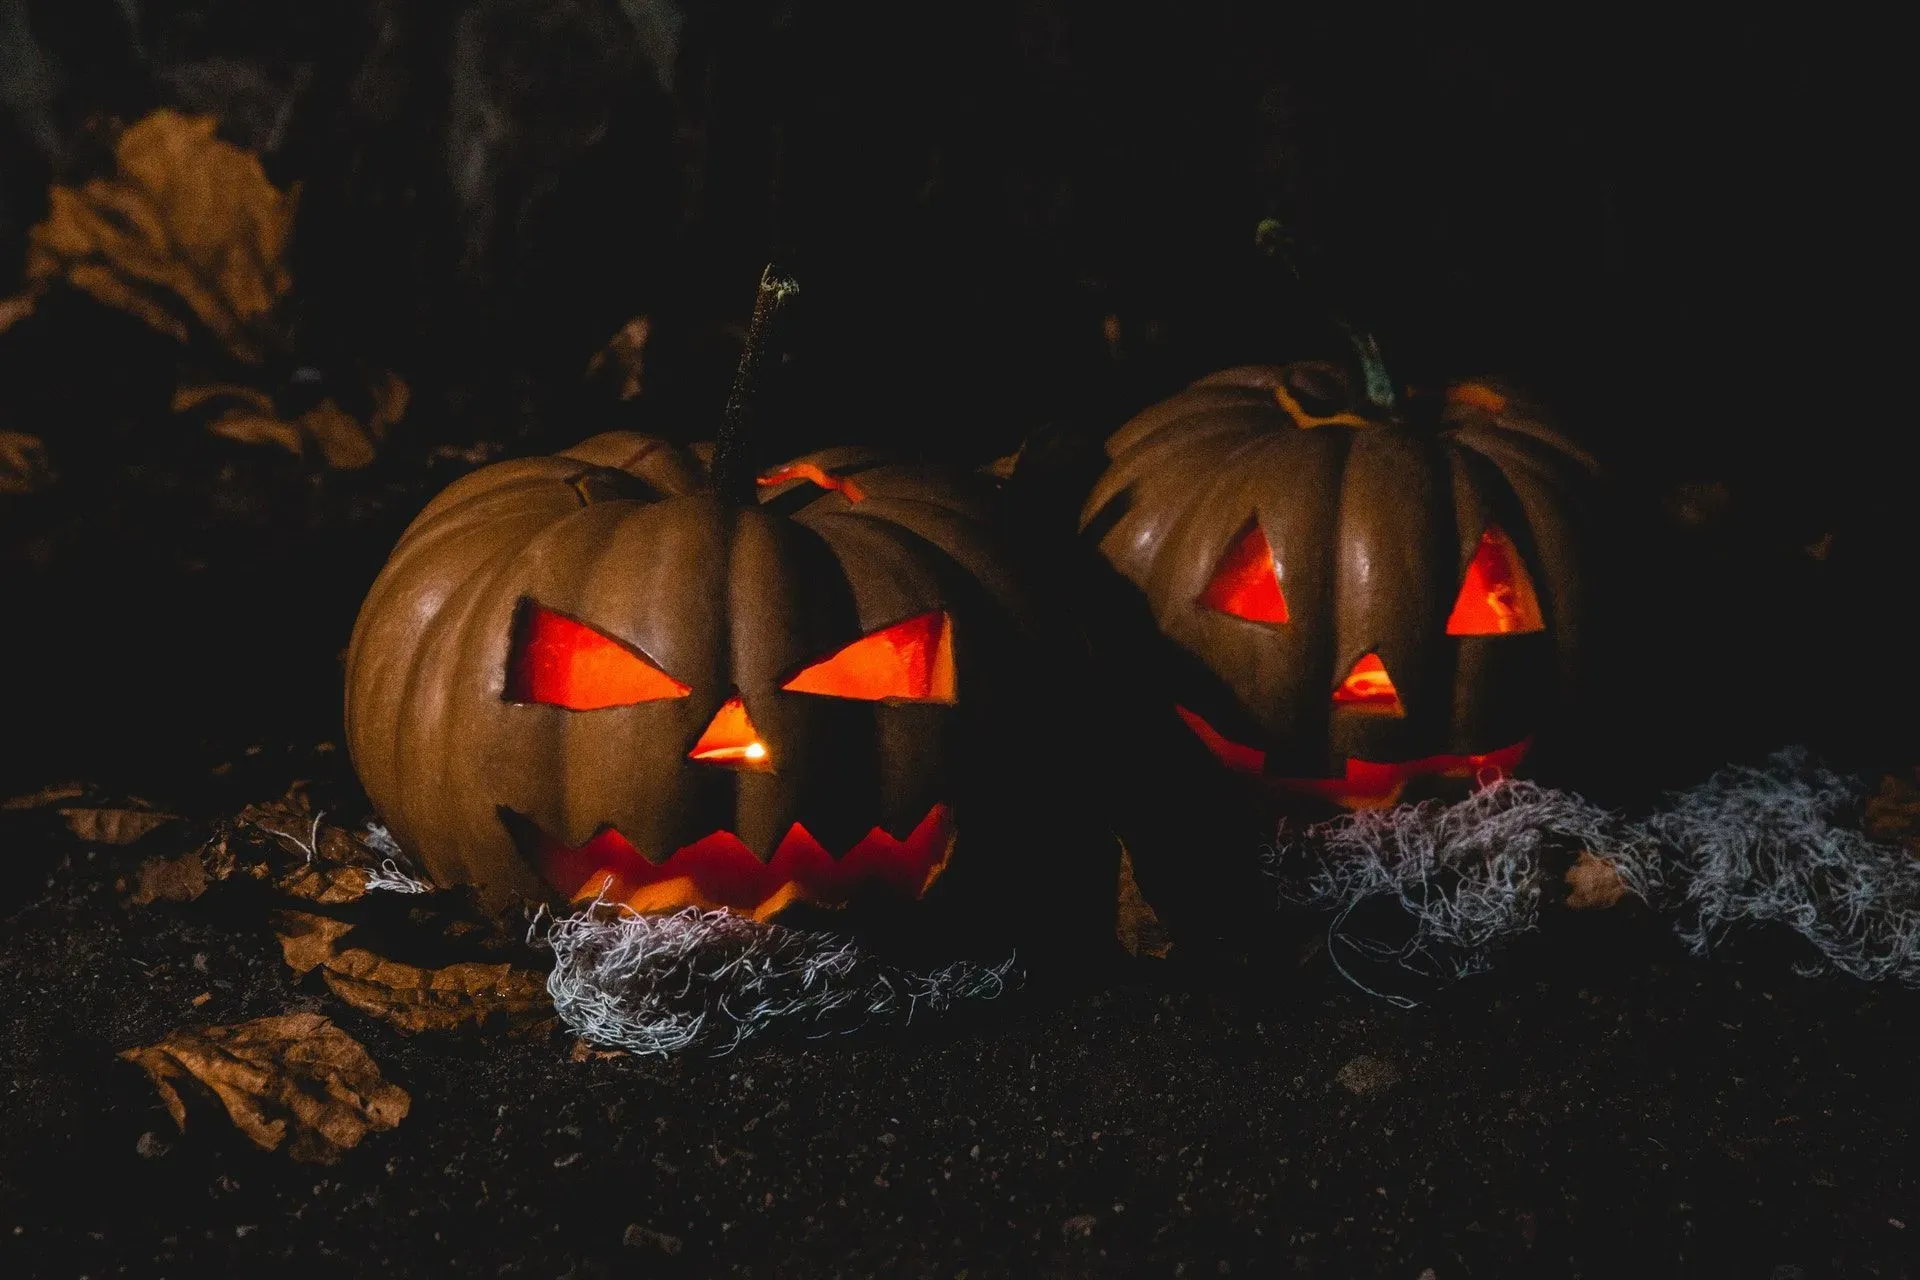 According to research, around 41% of the Americans start decorating their house from the first week of October for Halloween.